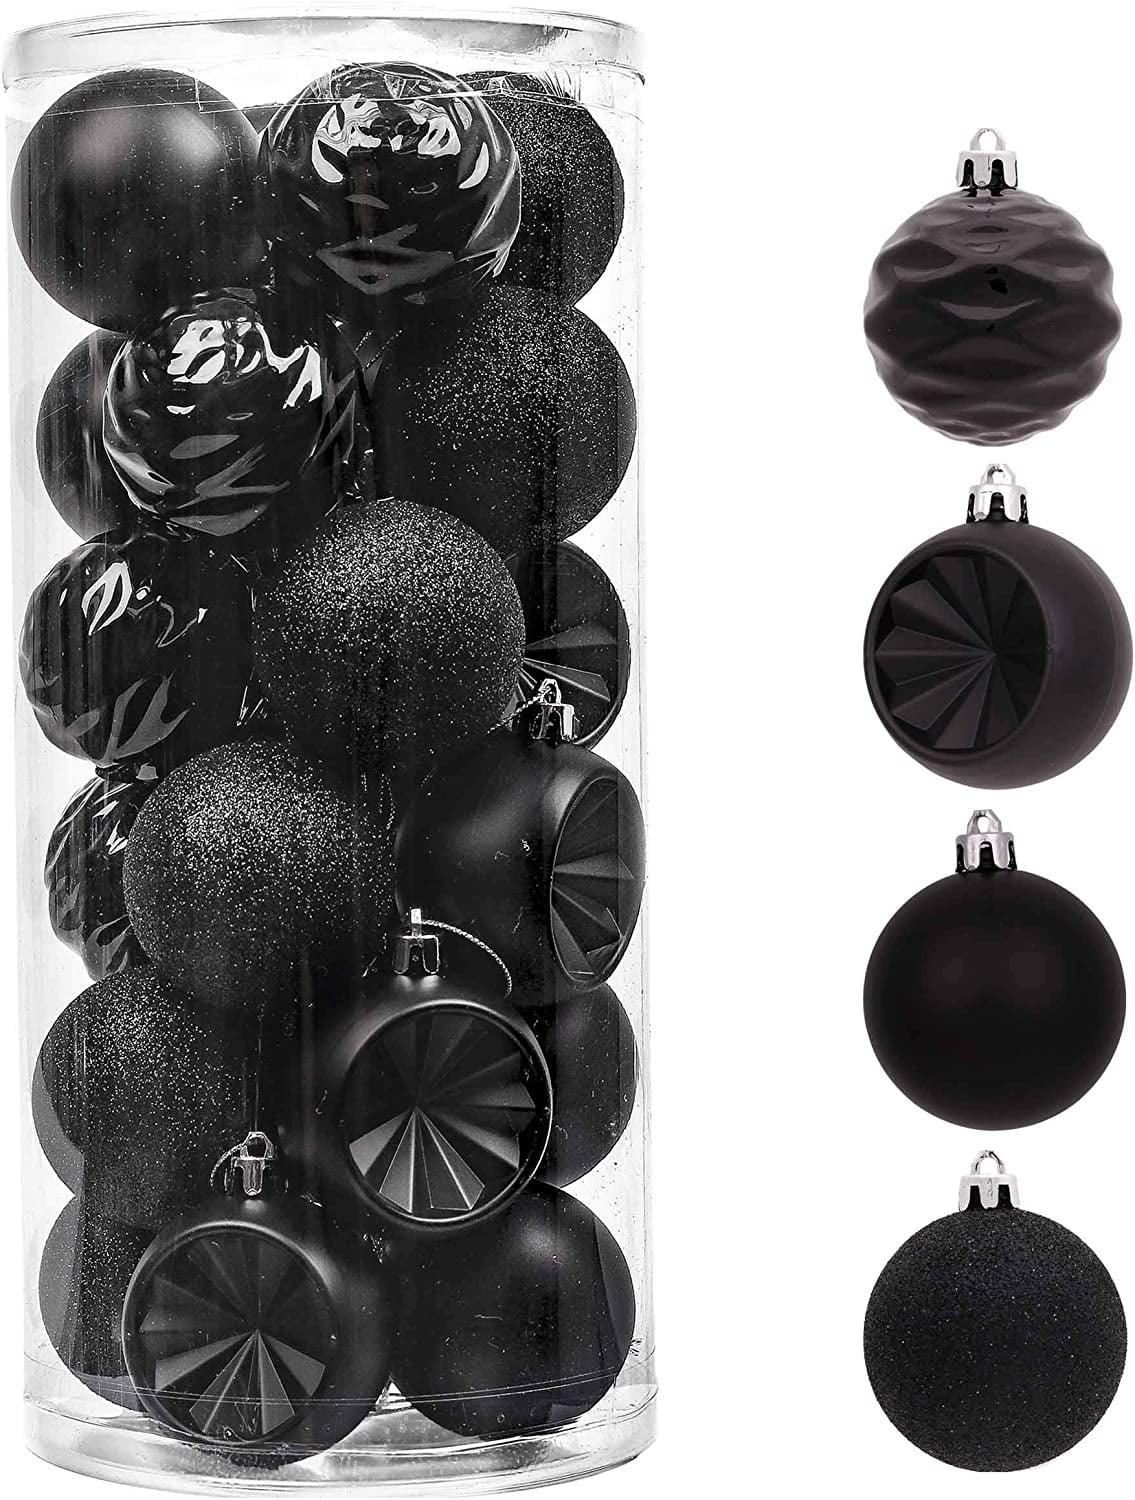 Valery Madelyn 30ct 2.36 Inches Christmas Ornaments Set, Black and White  Shatterproof Christmas Tree Decorations Ball Ornaments Bulk, Modern Hanging  Ornaments for Xmas Trees Holiday Decor 